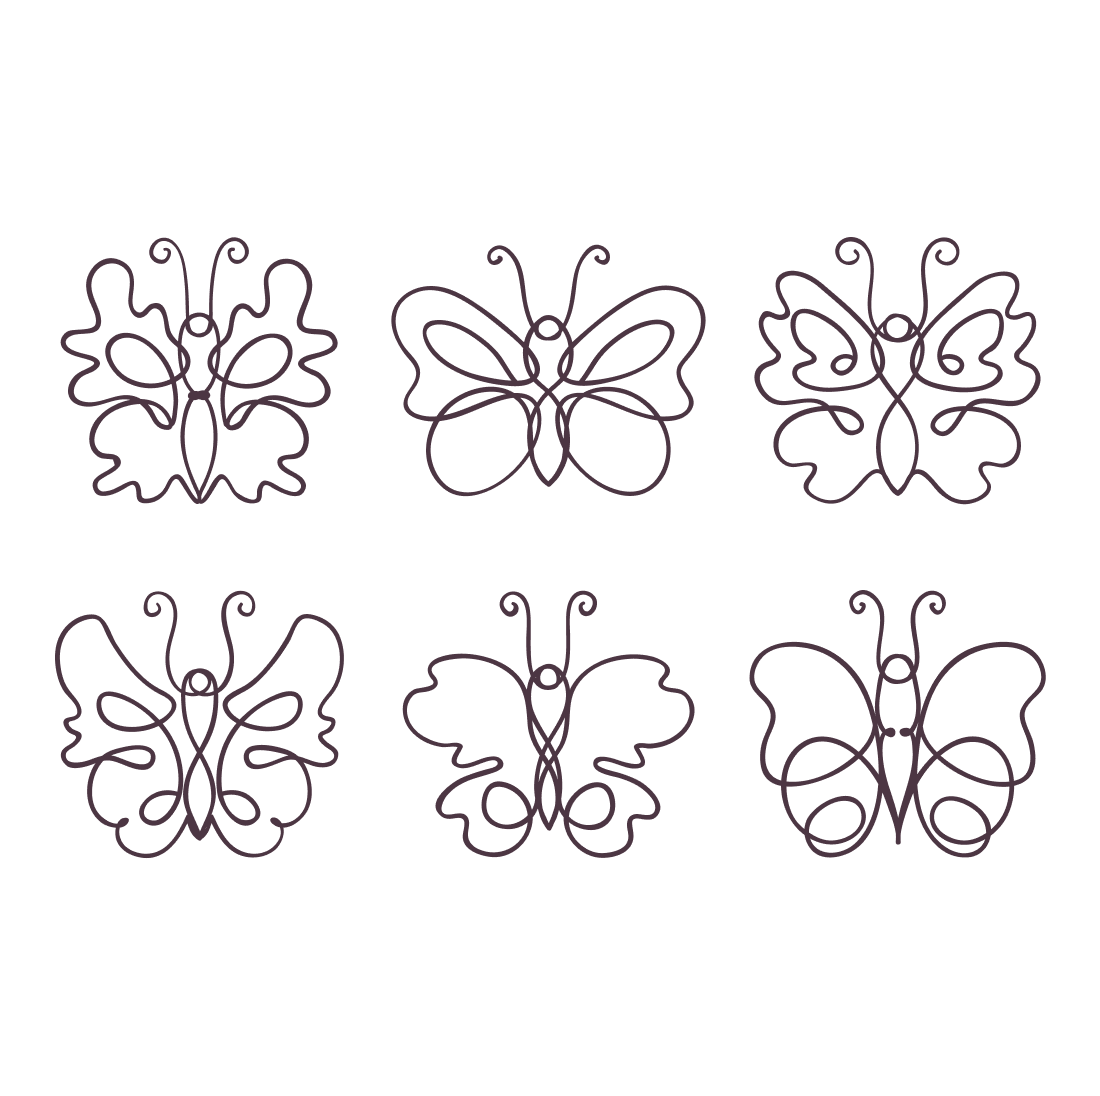 Set of four butterfly designs on a white background.